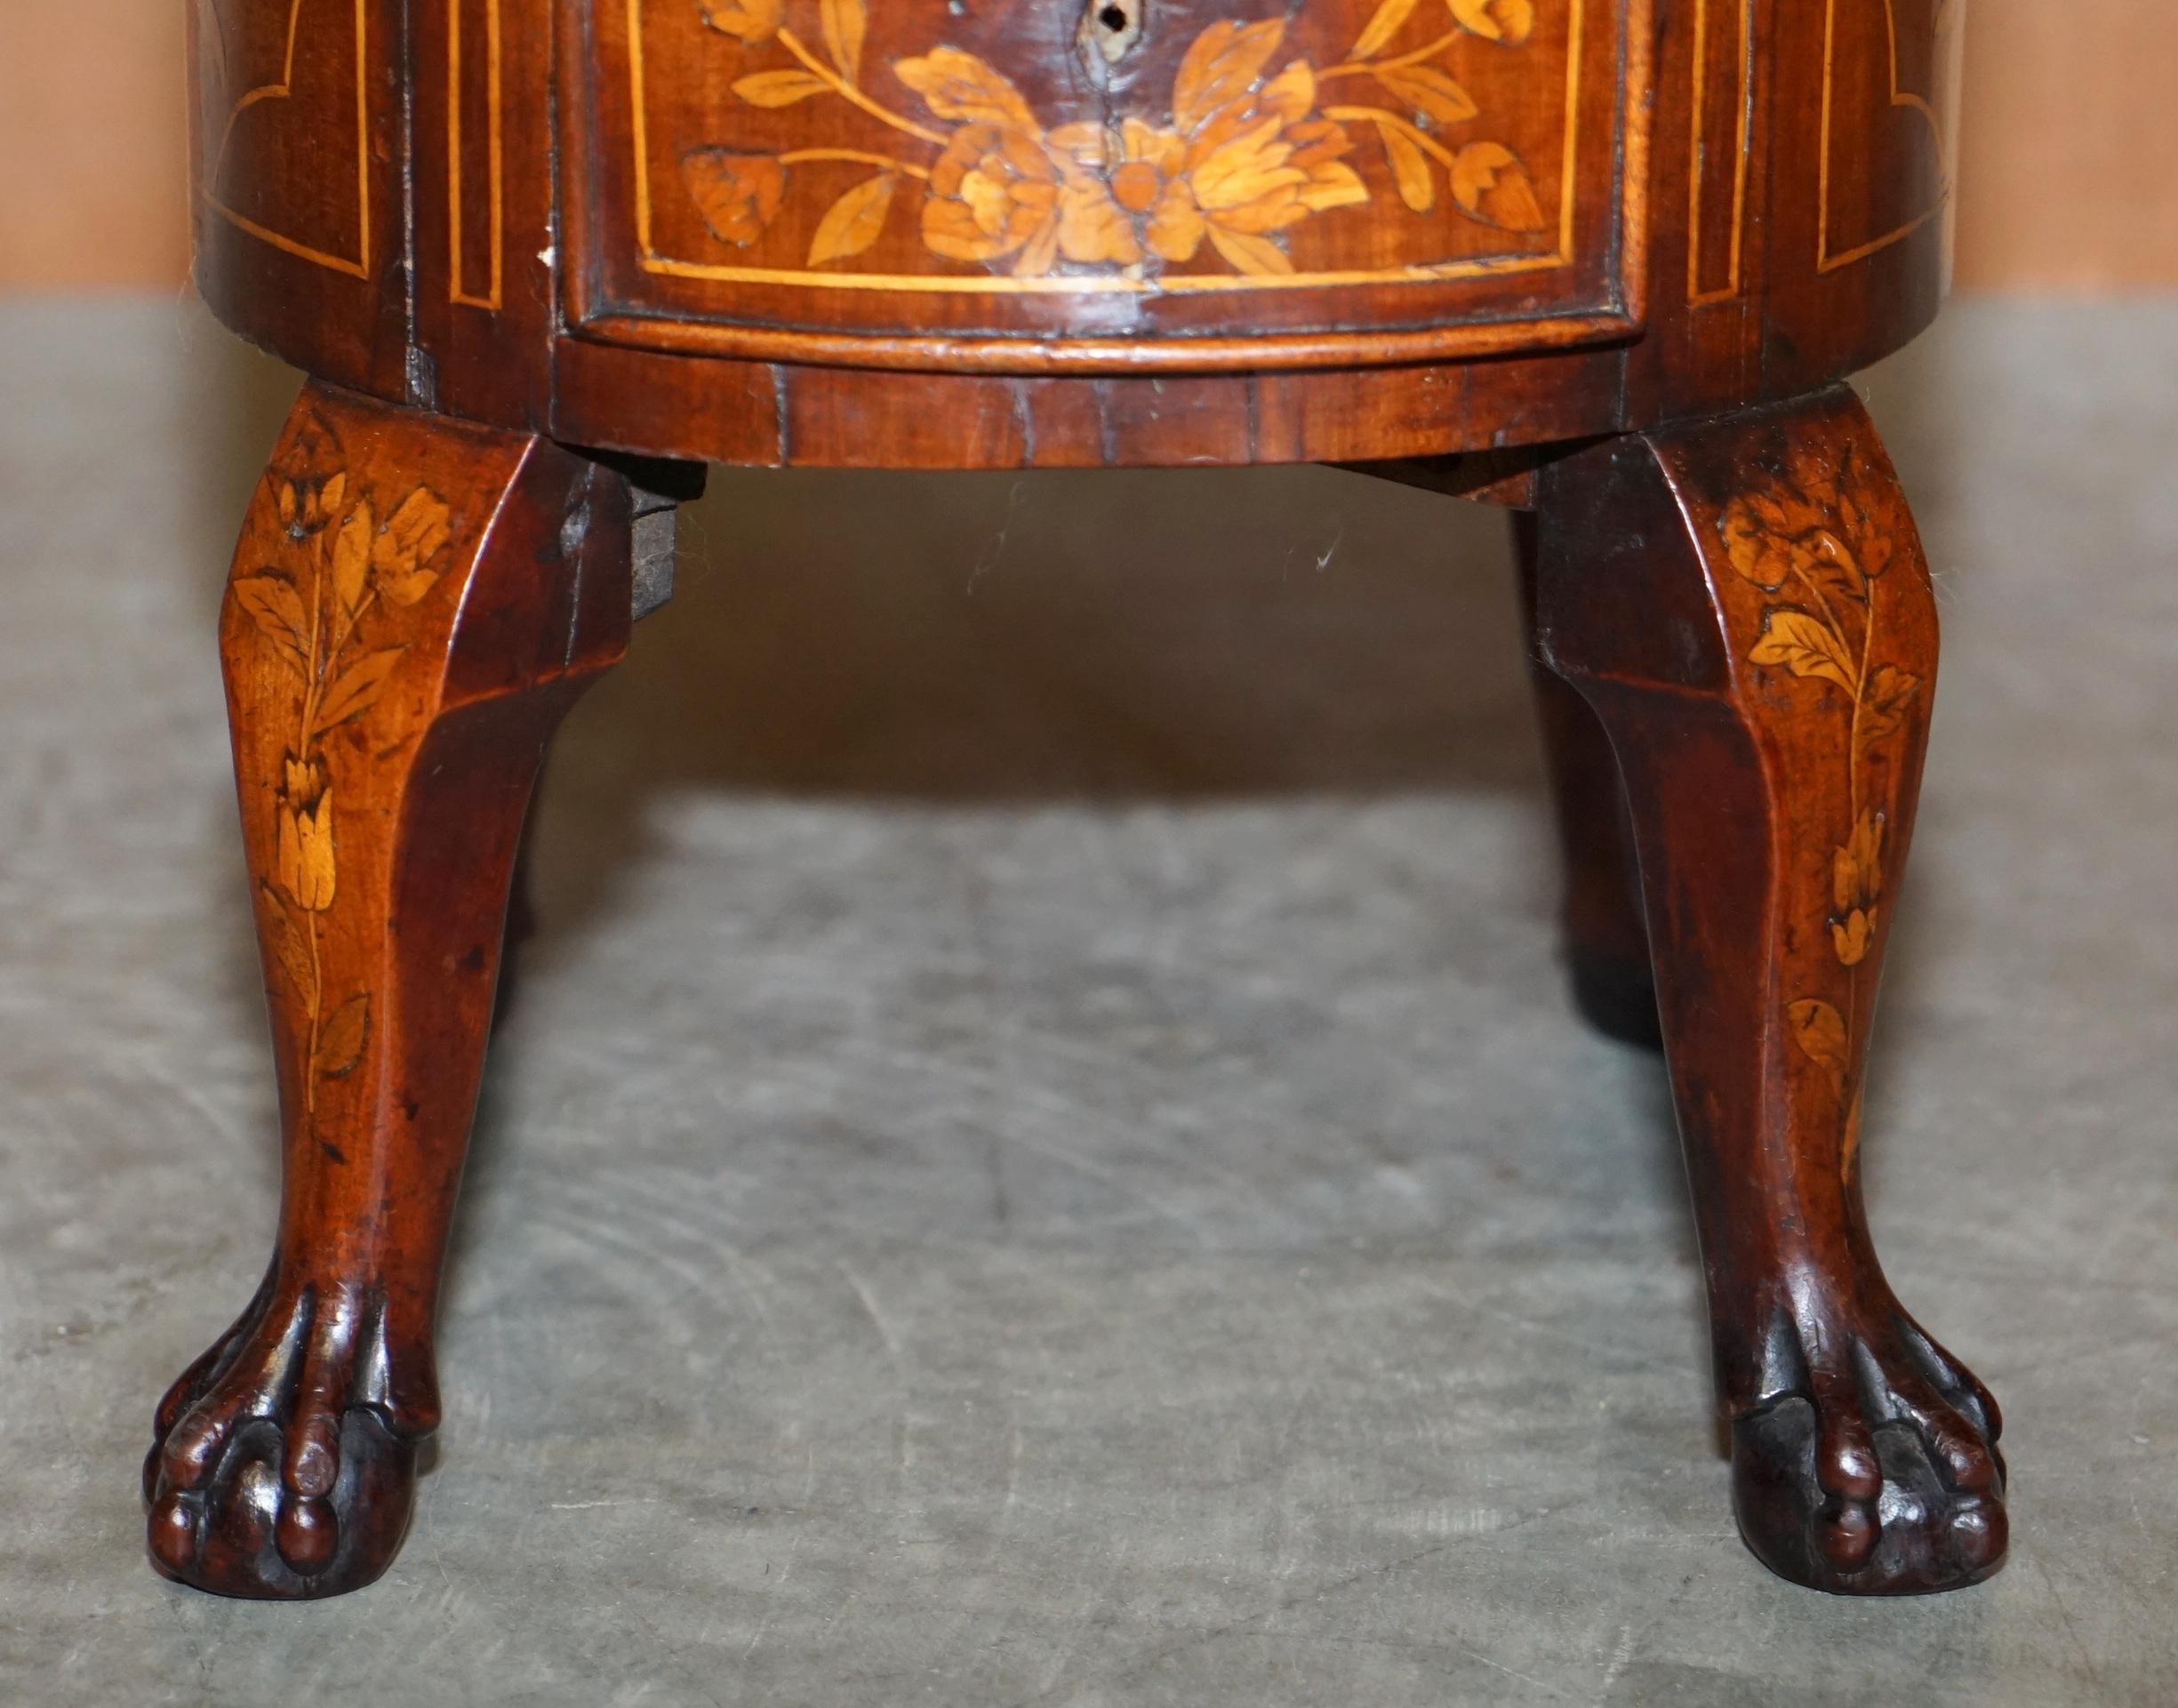 Early 19th Century Exquisite Antique circa 1800 Dutch Inlaid Wine Cooler Bucket Claw & Ball Feet For Sale